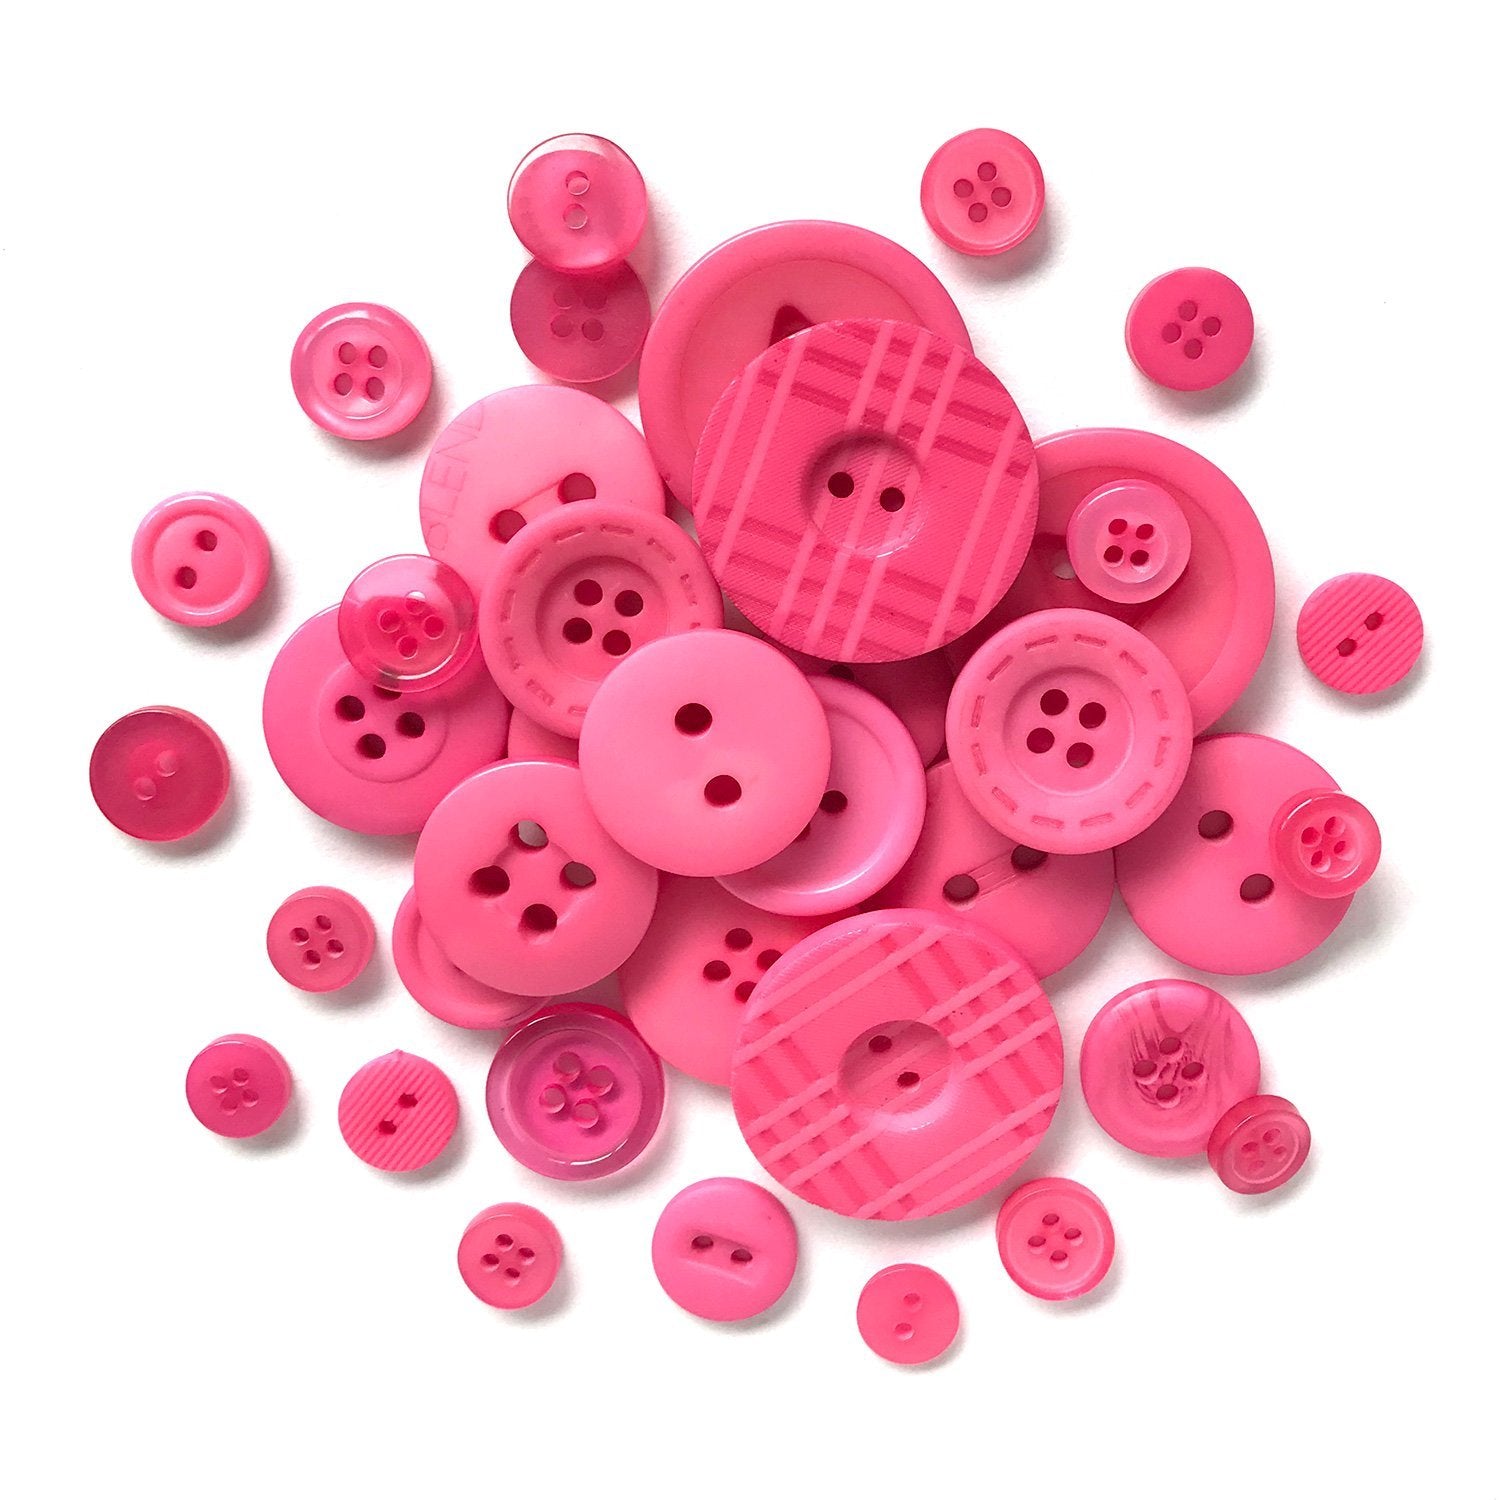 Buttons Galore Printed Craft & Sewing Buttons - Tickle Me Pink - Set of 3  Packs Total 45 Buttons